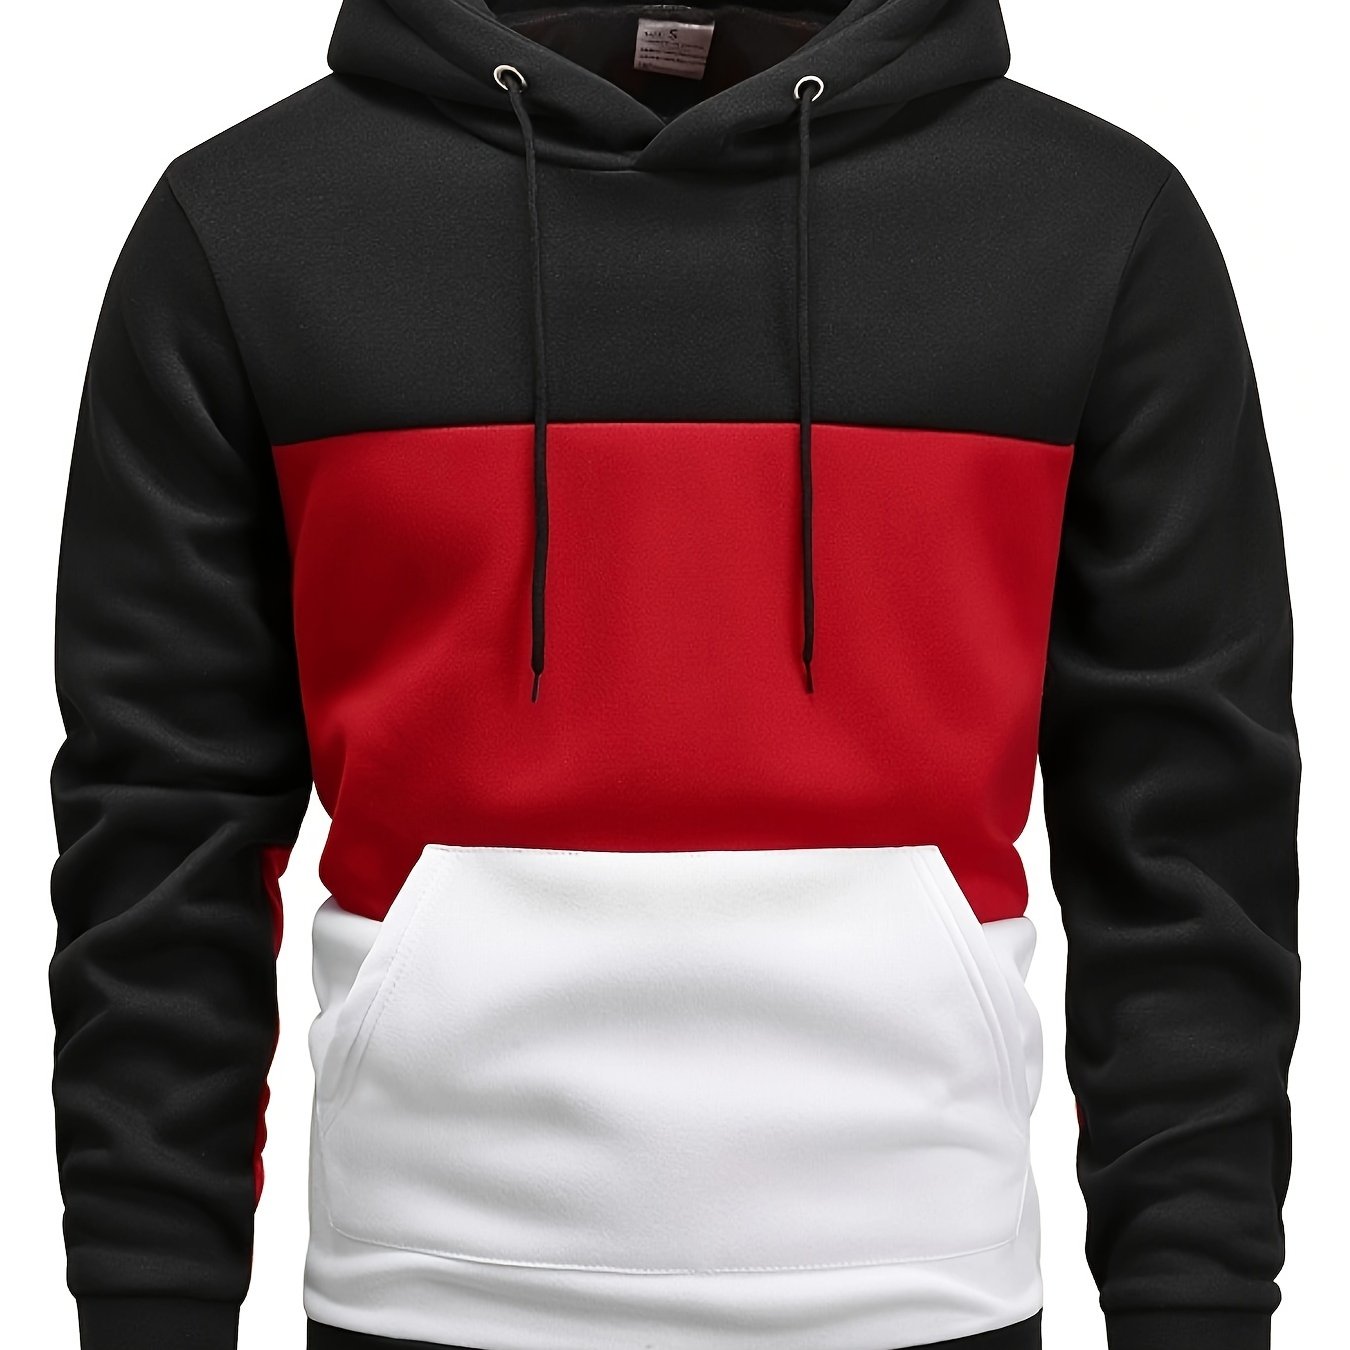 Color Block Hoodie, Cool Hoodies For Men, Men's Casual Graphic Design Pullover Hooded Sweatshirt With Kangaroo Pocket Streetwear For Winter Fall, As Gifts